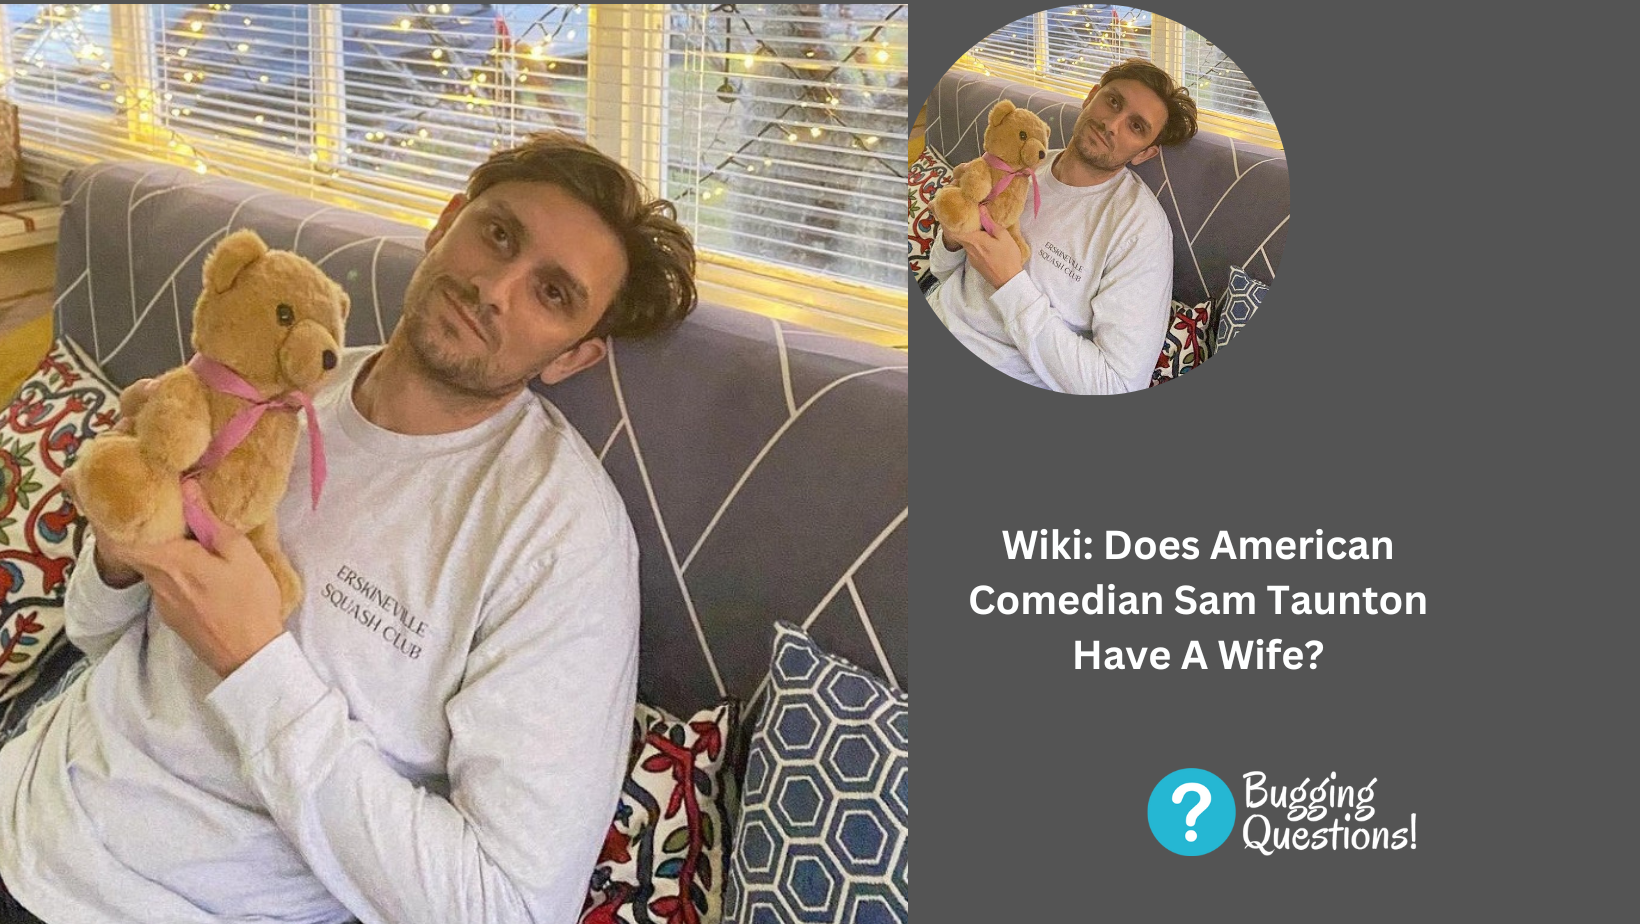 Wiki: Does American Comedian Sam Taunton Have A Wife?